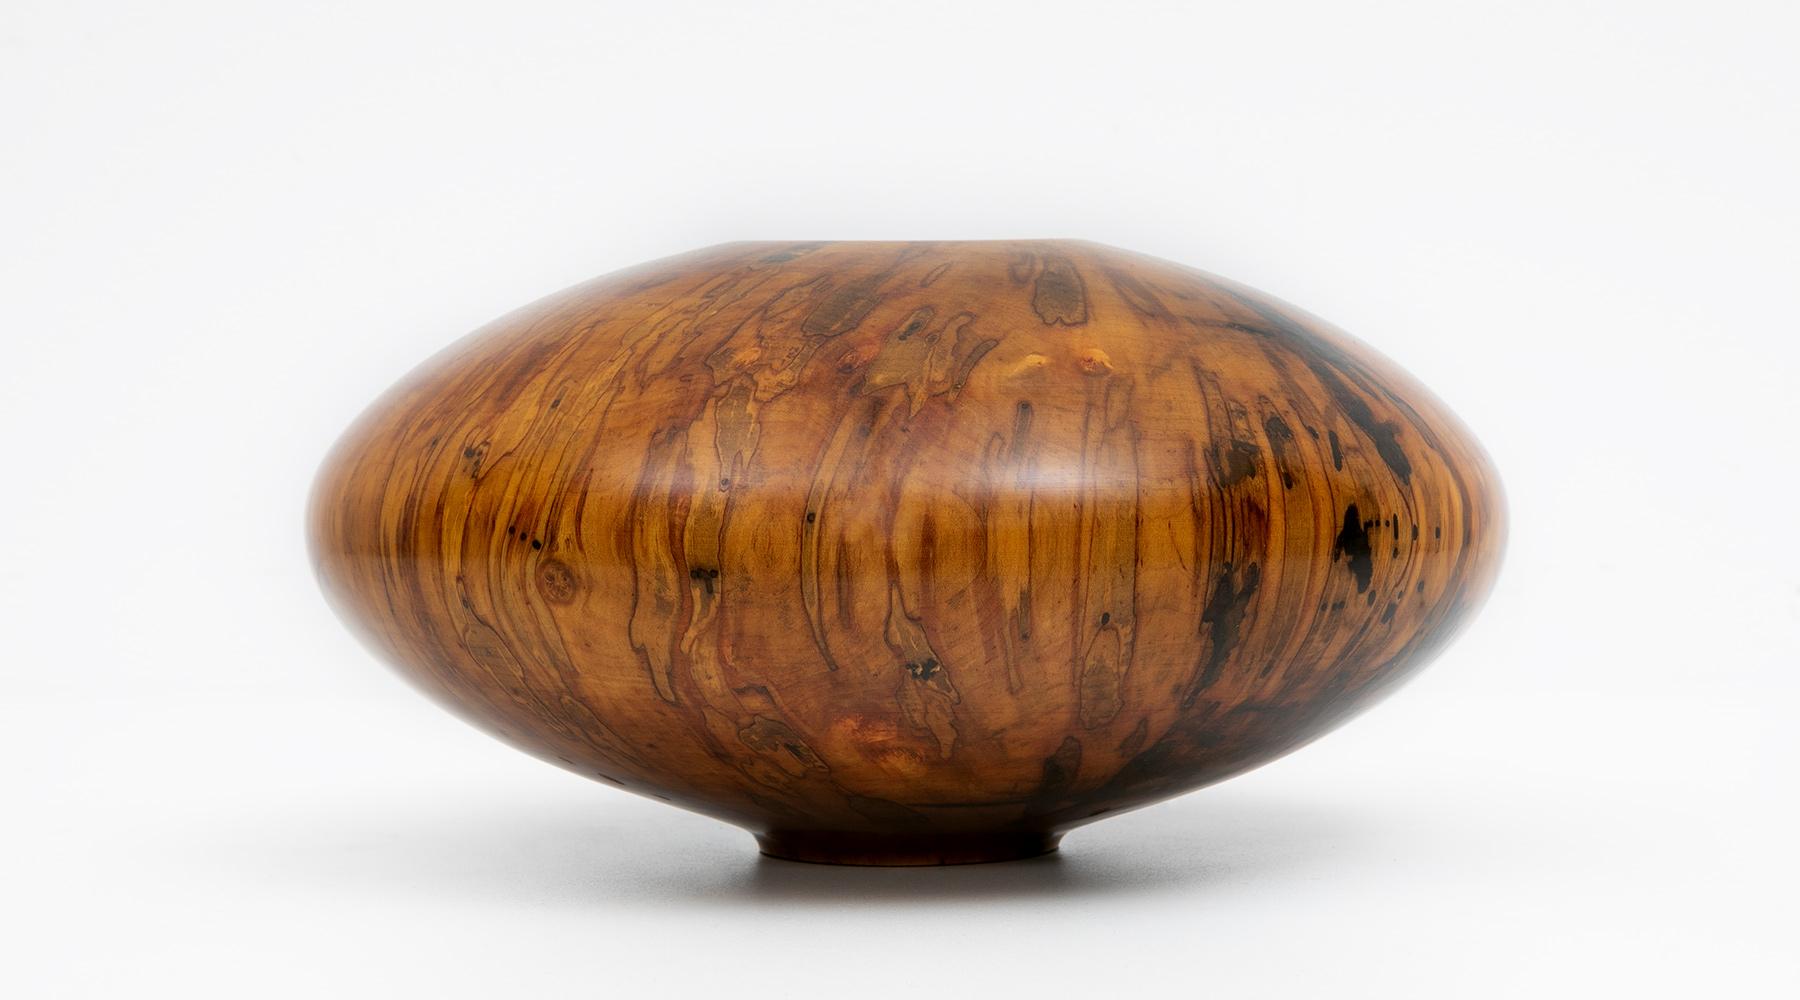 Vase in Maplewood by Philip Moulthrop, 1978, USA.

Magnificent Moulthrop bowl, turned red leopard maple vessel. The stunning pattern originates in the process of wood turning, founded by the Moulthrop family and practiced since three generations.